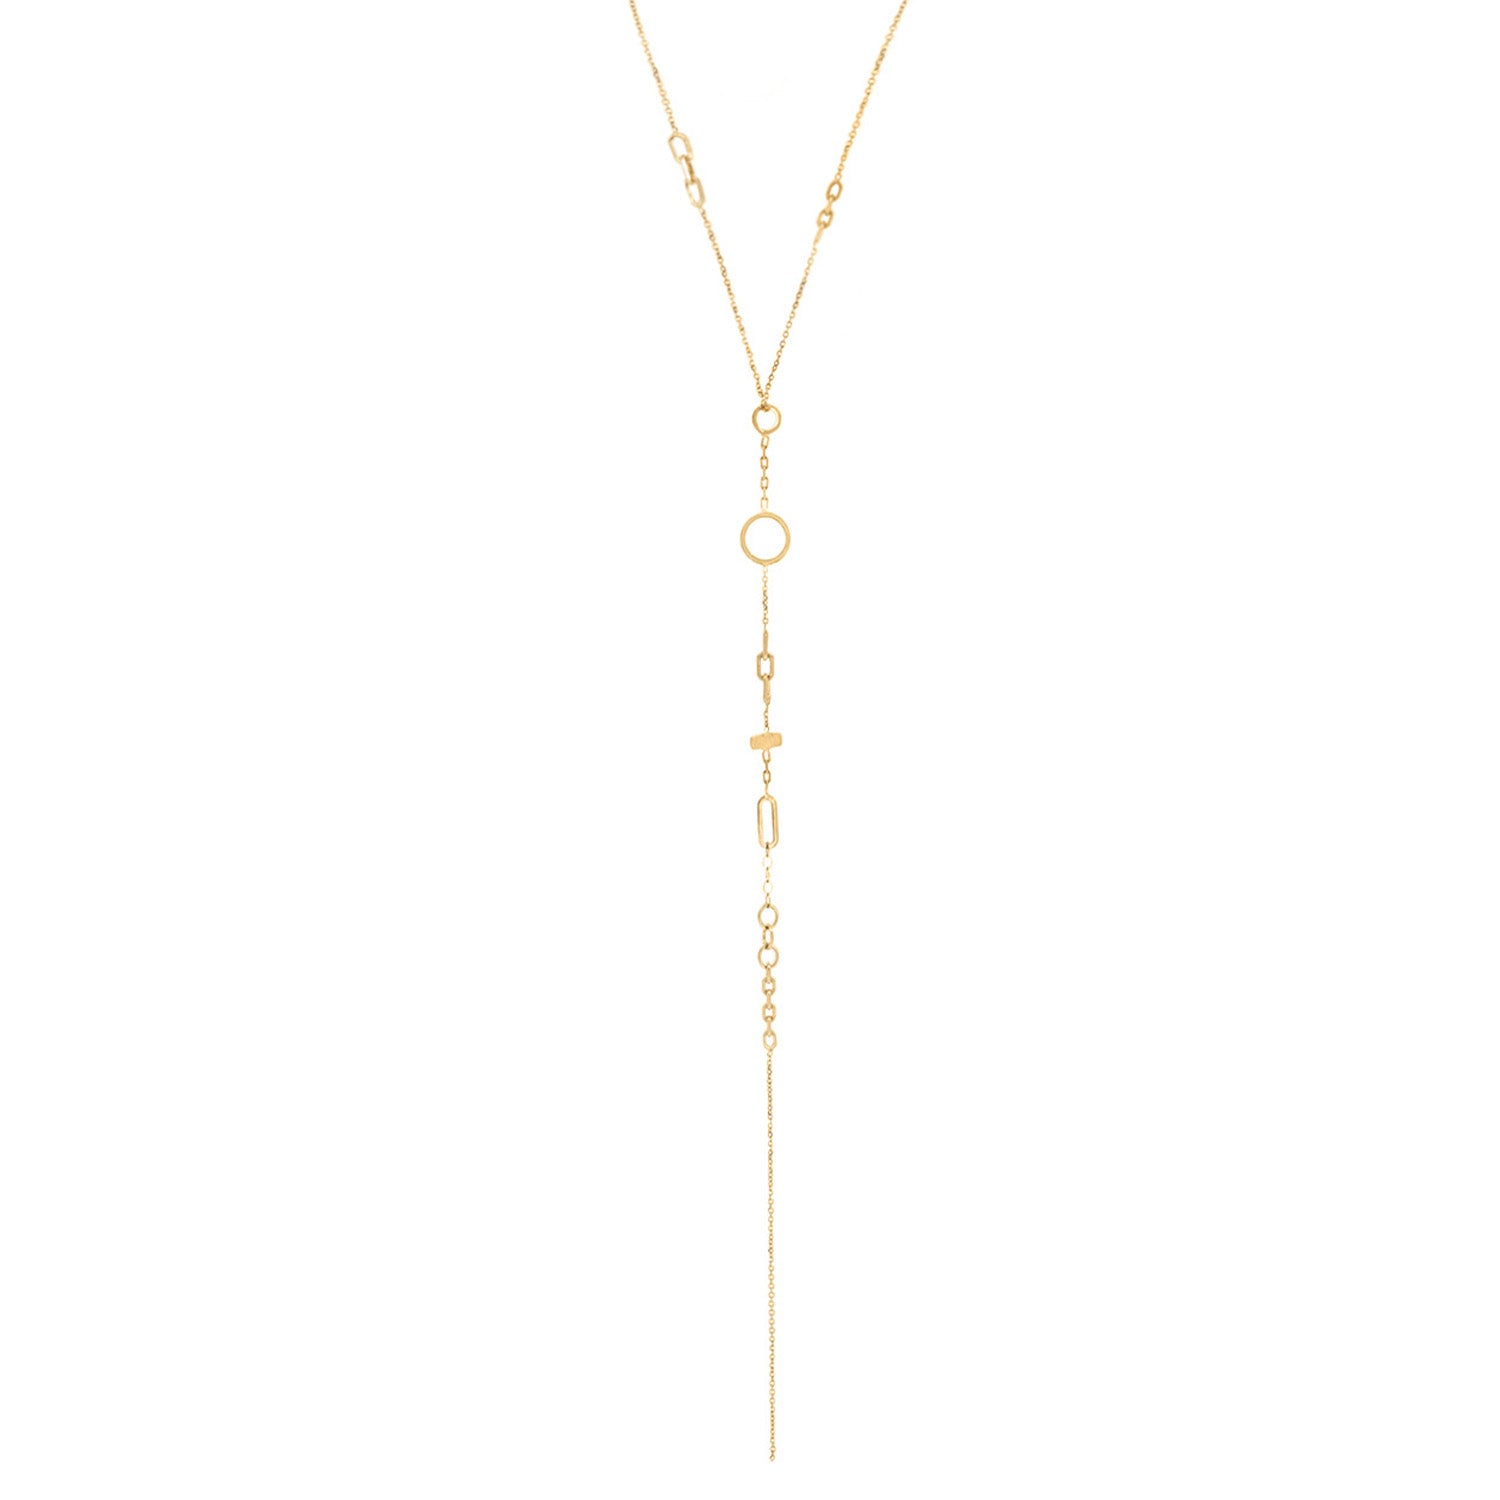 18ct Gold Chains Galore Lariat Necklace.